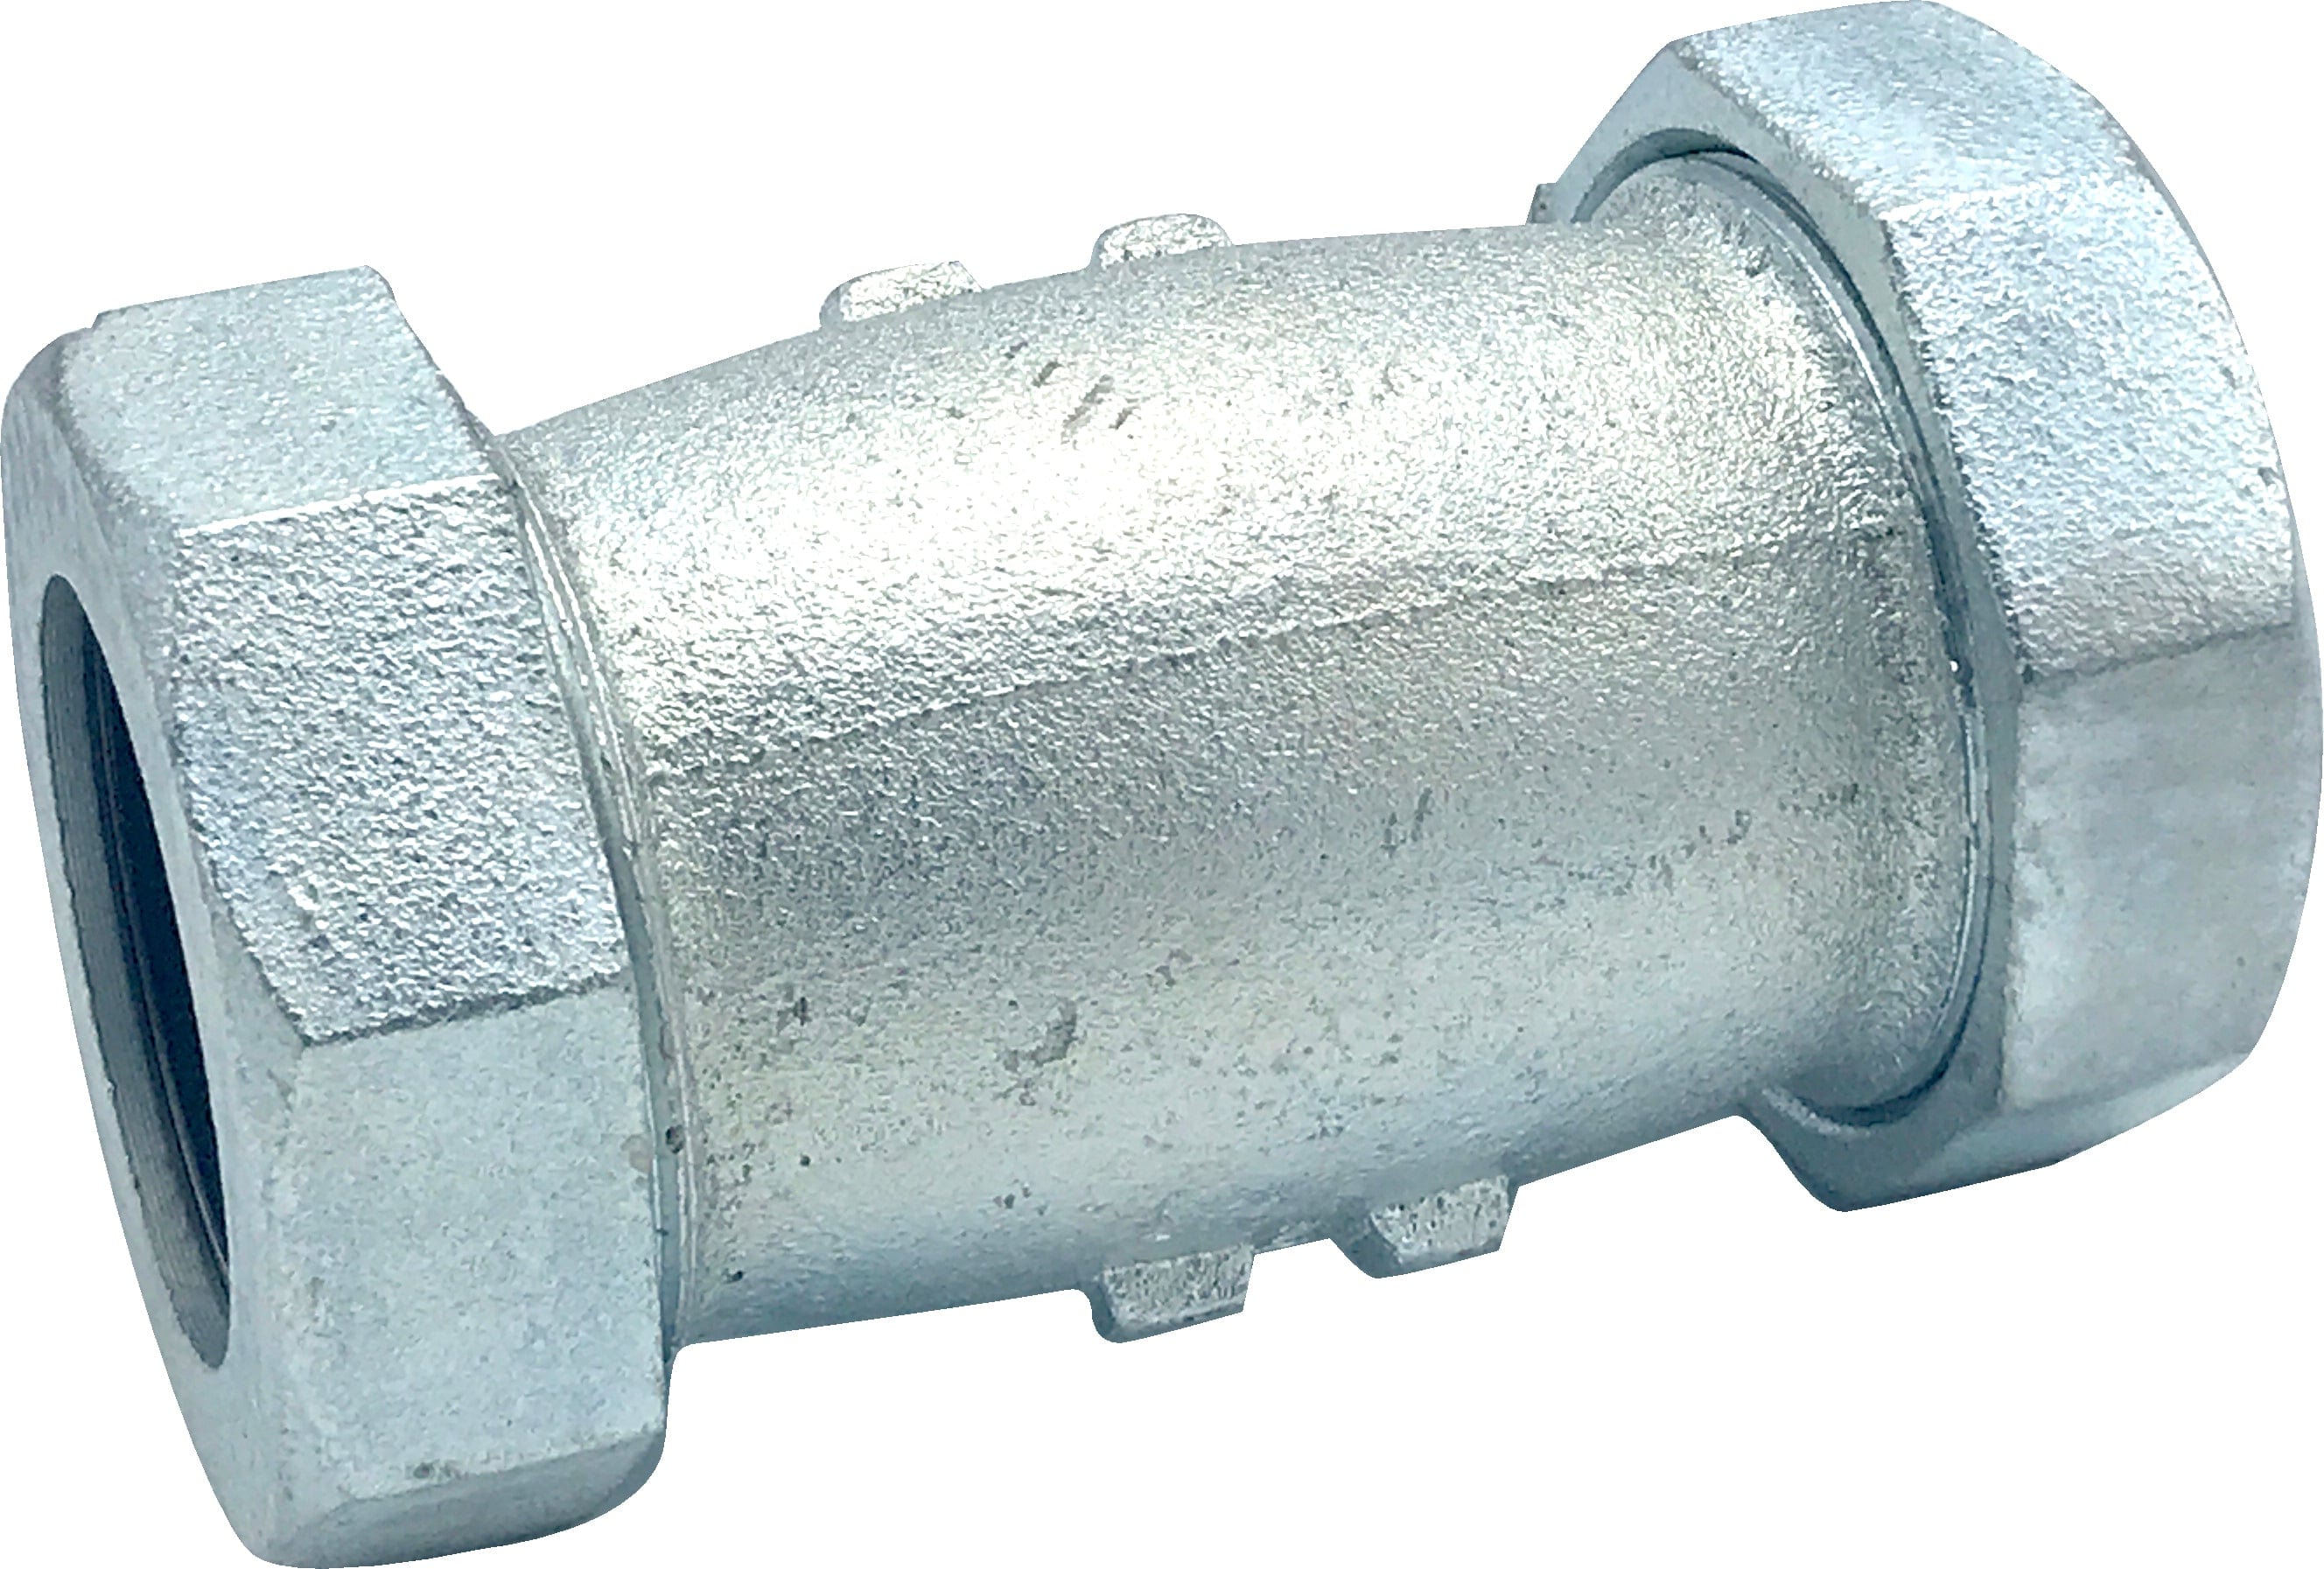 1 1/4" Long Galvanized Compression Coupling